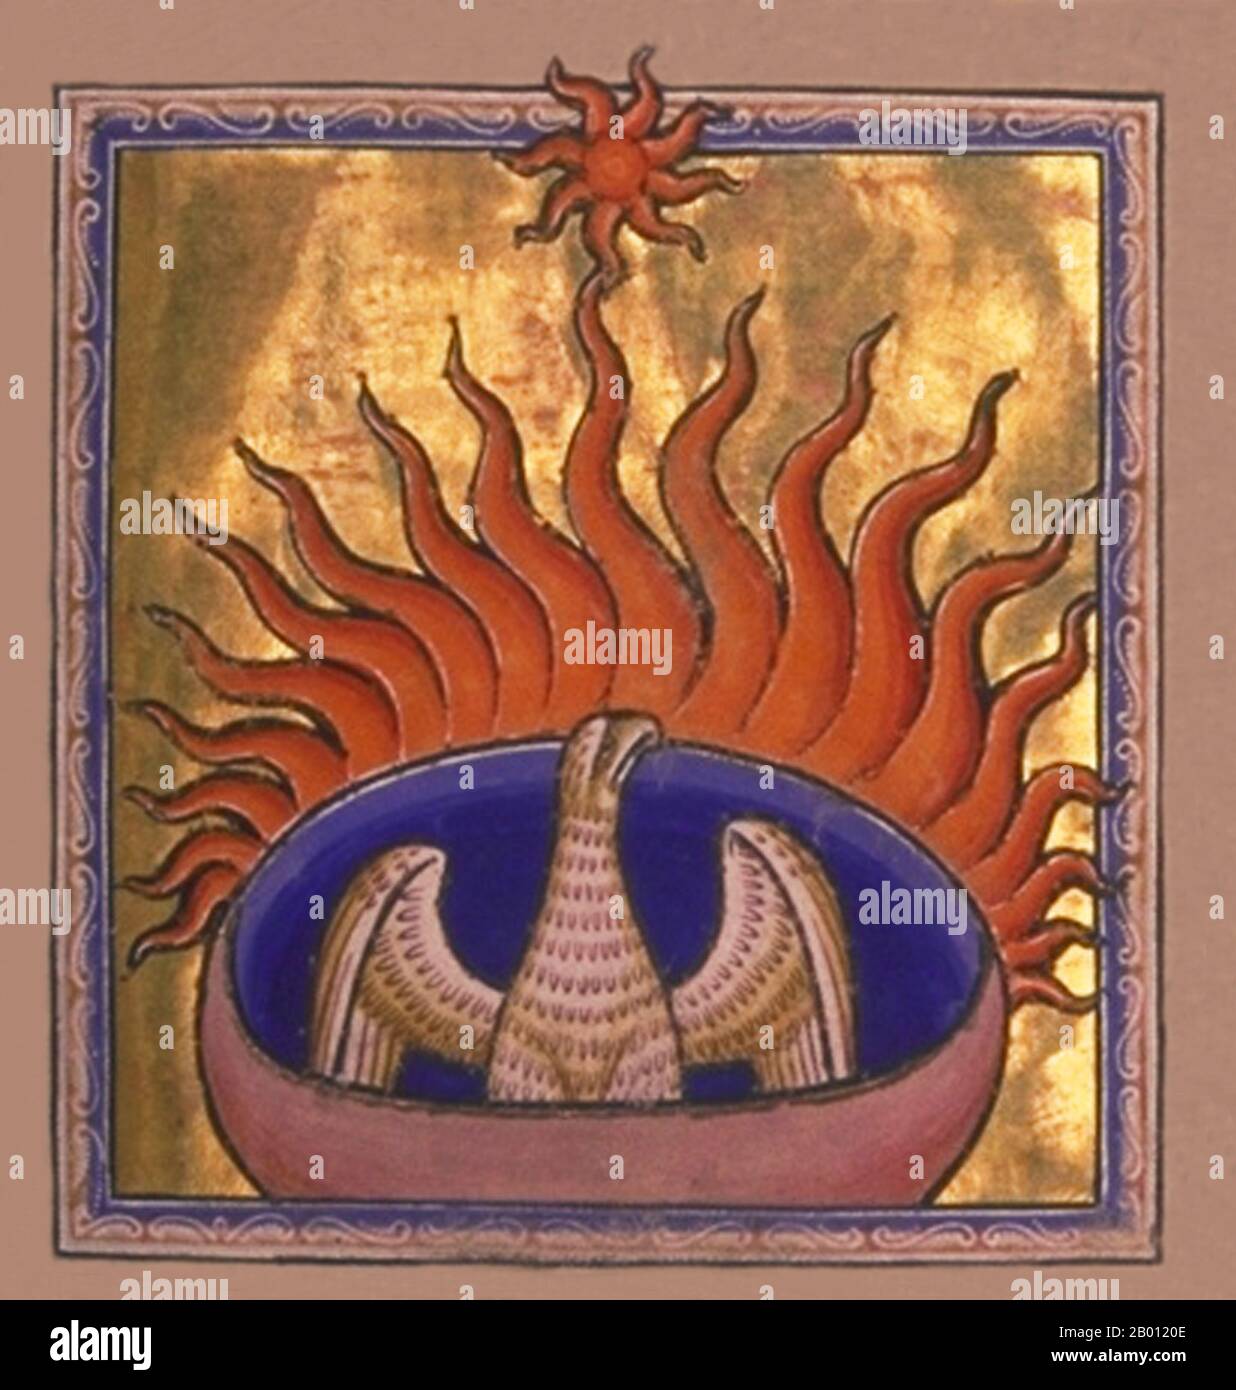 Scotland: A phoenix as depicted in the Aberdeen Bestiary (12th century).  The phoenix is a mythical sacred firebird that can be found in the mythologies of the Persians, Greeks, Romans, Egyptians, Chinese, and (according to Sanchuniathon) Phoenicians.  A phoenix is a mythical bird that is a fire spirit with a colorful plumage and a tail of gold and scarlet (or purple, blue, and green according to some legends). It has a 500 to 1000 year life-cycle, near the end of which it builds itself a nest of twigs that then ignites, reduced to ashes before being reborn. Stock Photo